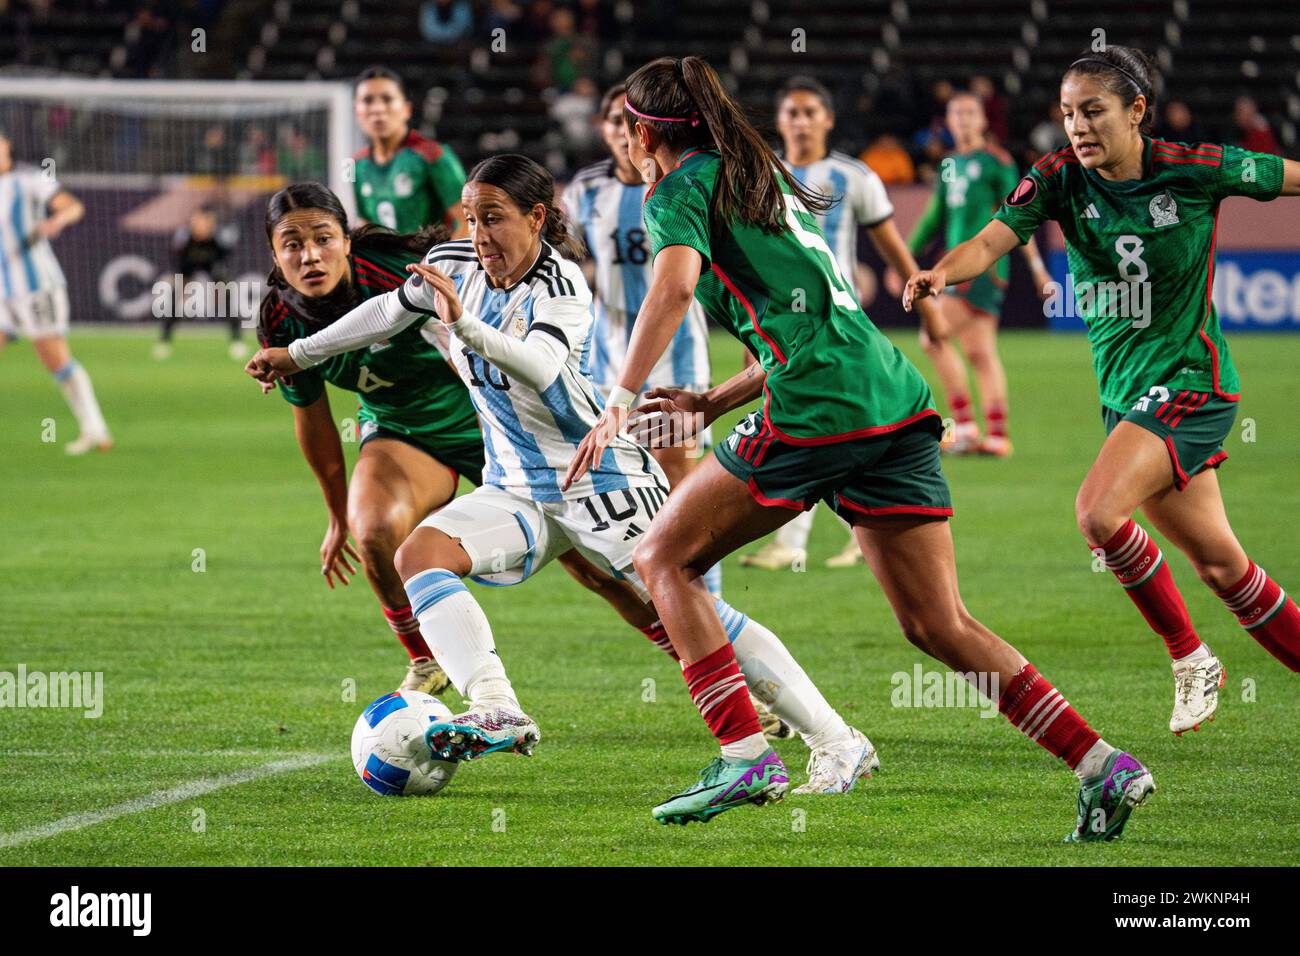 Argentina midfielder Dalila Ippólito (10) is defended by Mexico defender Karen Luna (5) and defender Rebeca Bernal (4) during the Concacaf W Gold Cup Stock Photo